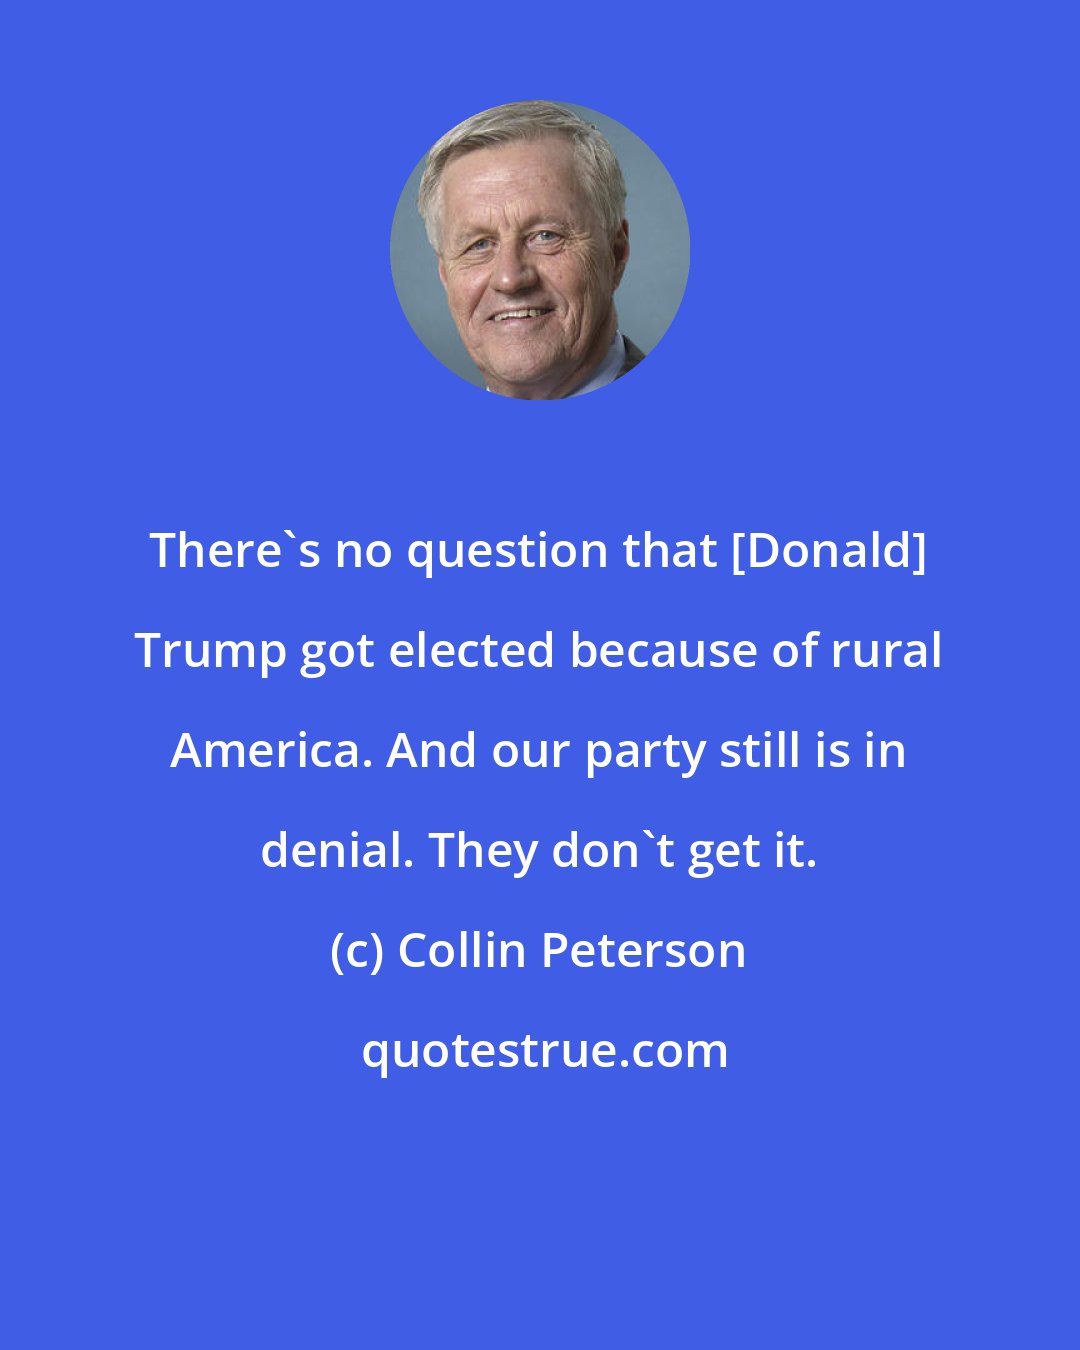 Collin Peterson: There's no question that [Donald] Trump got elected because of rural America. And our party still is in denial. They don't get it.